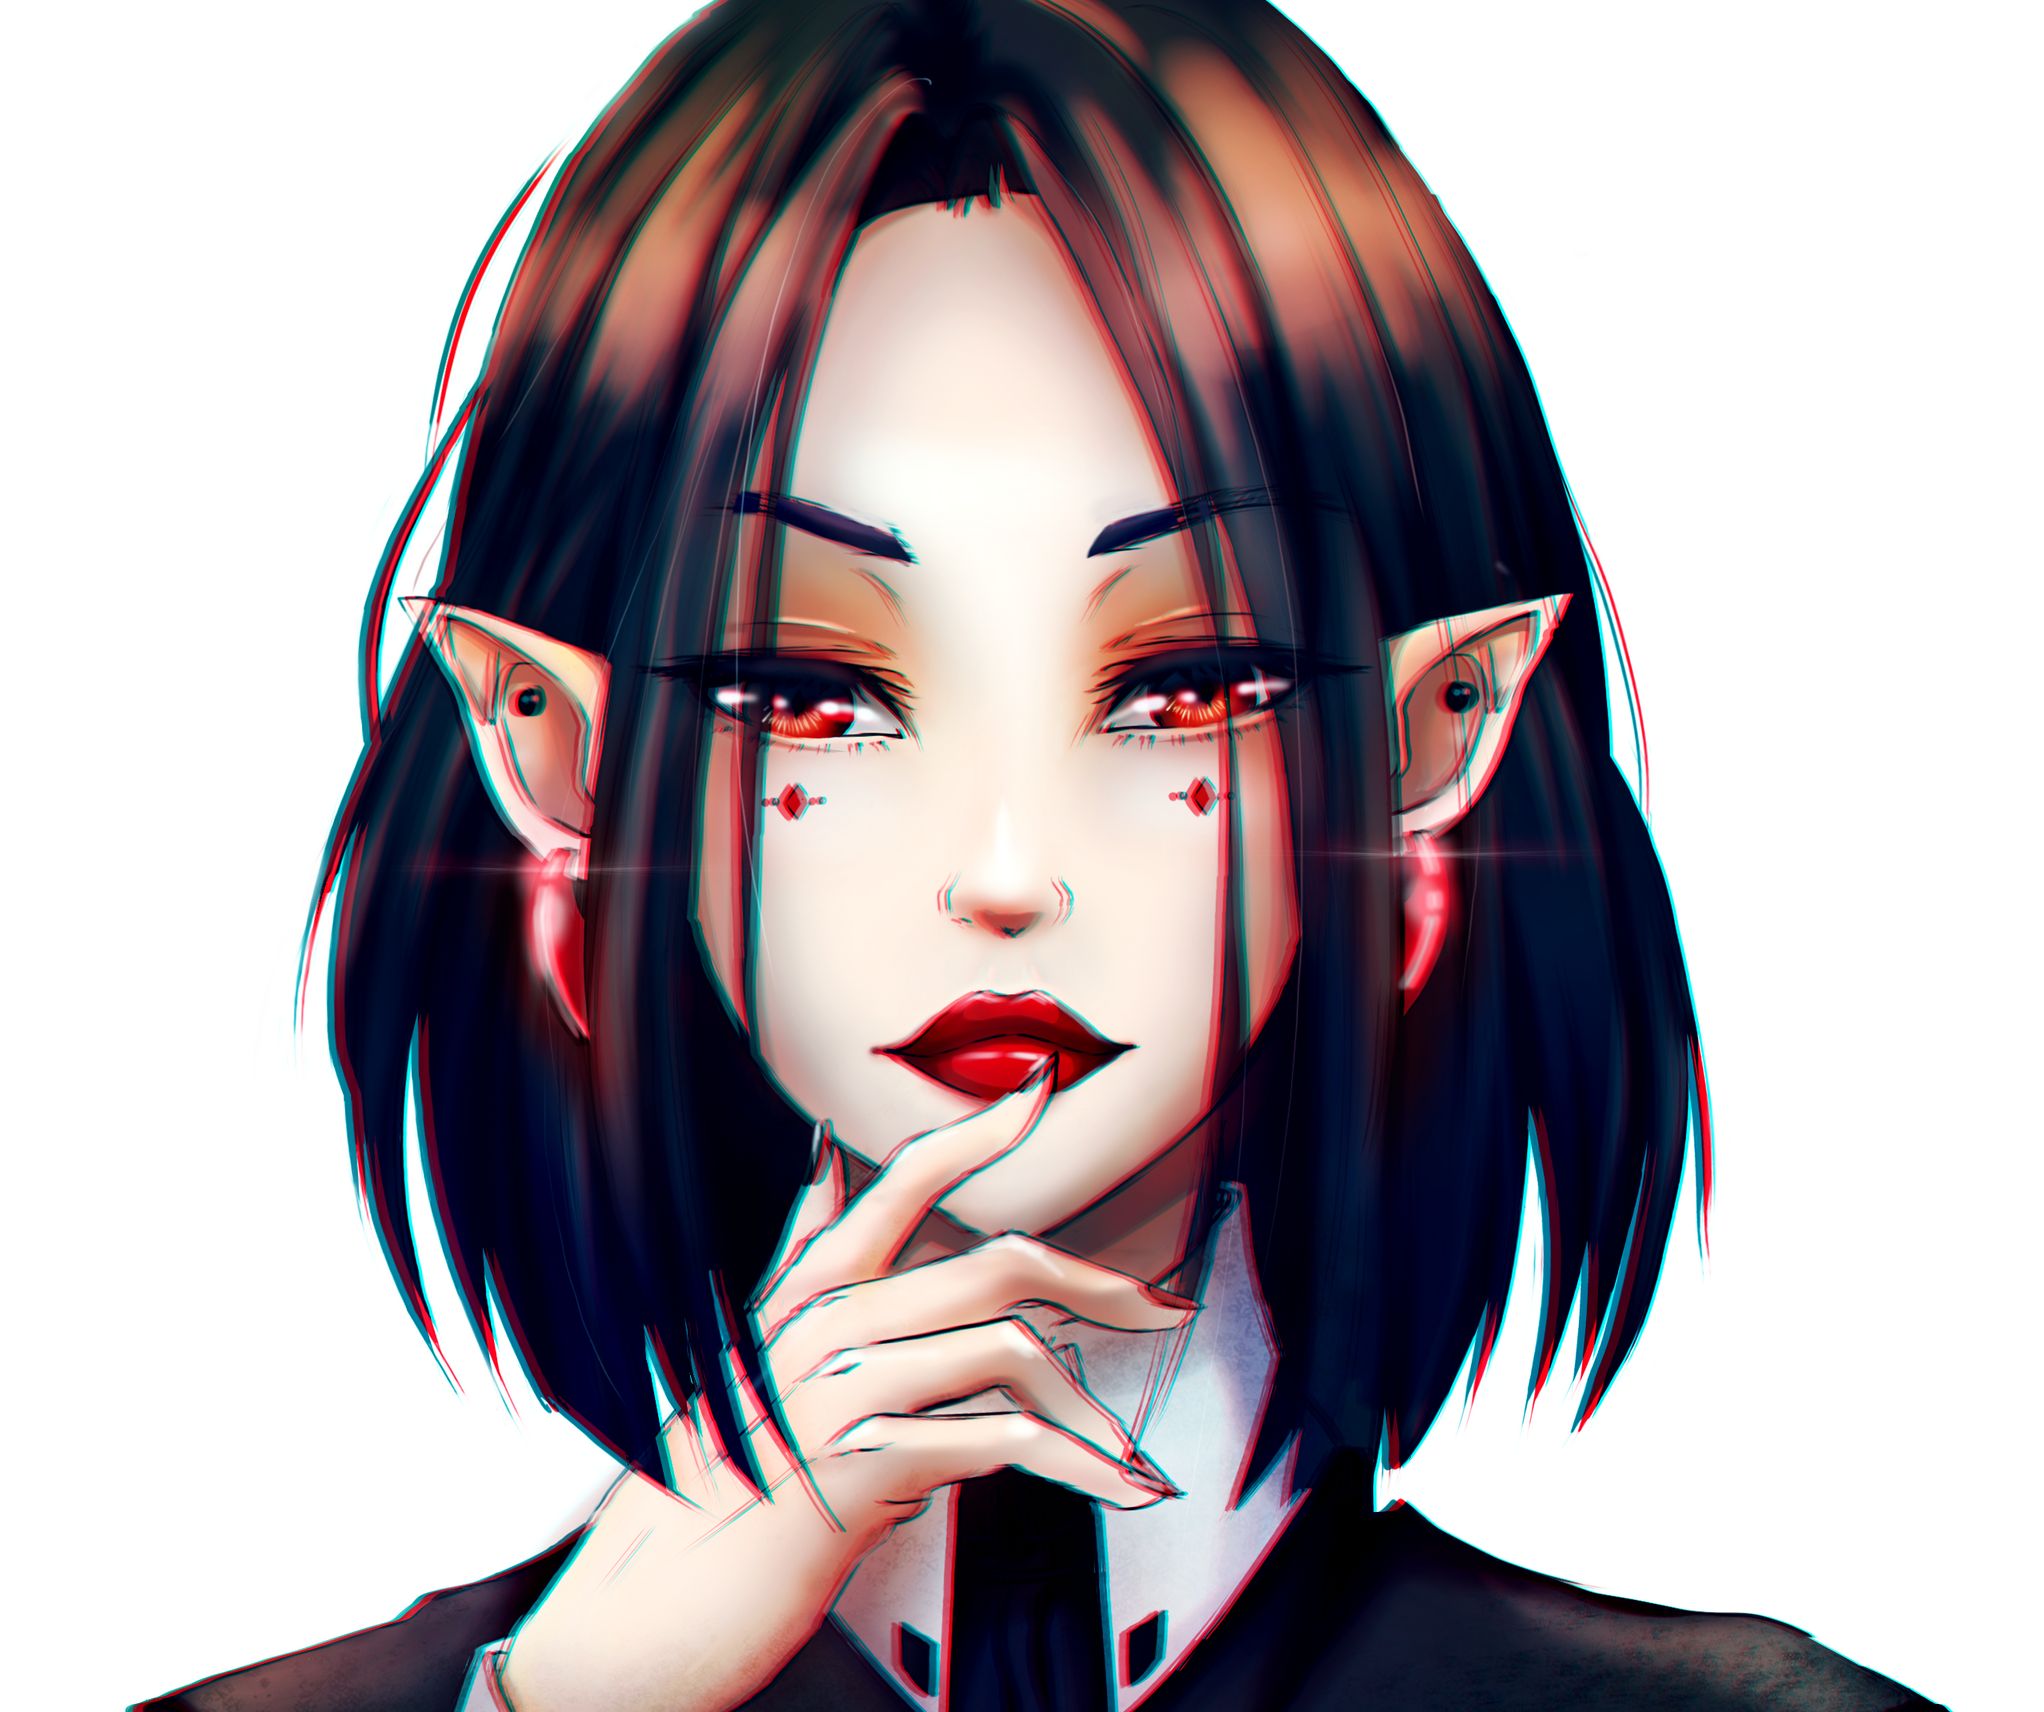 Anime Vampire Girl With Black Hair And Red Eyes 6694